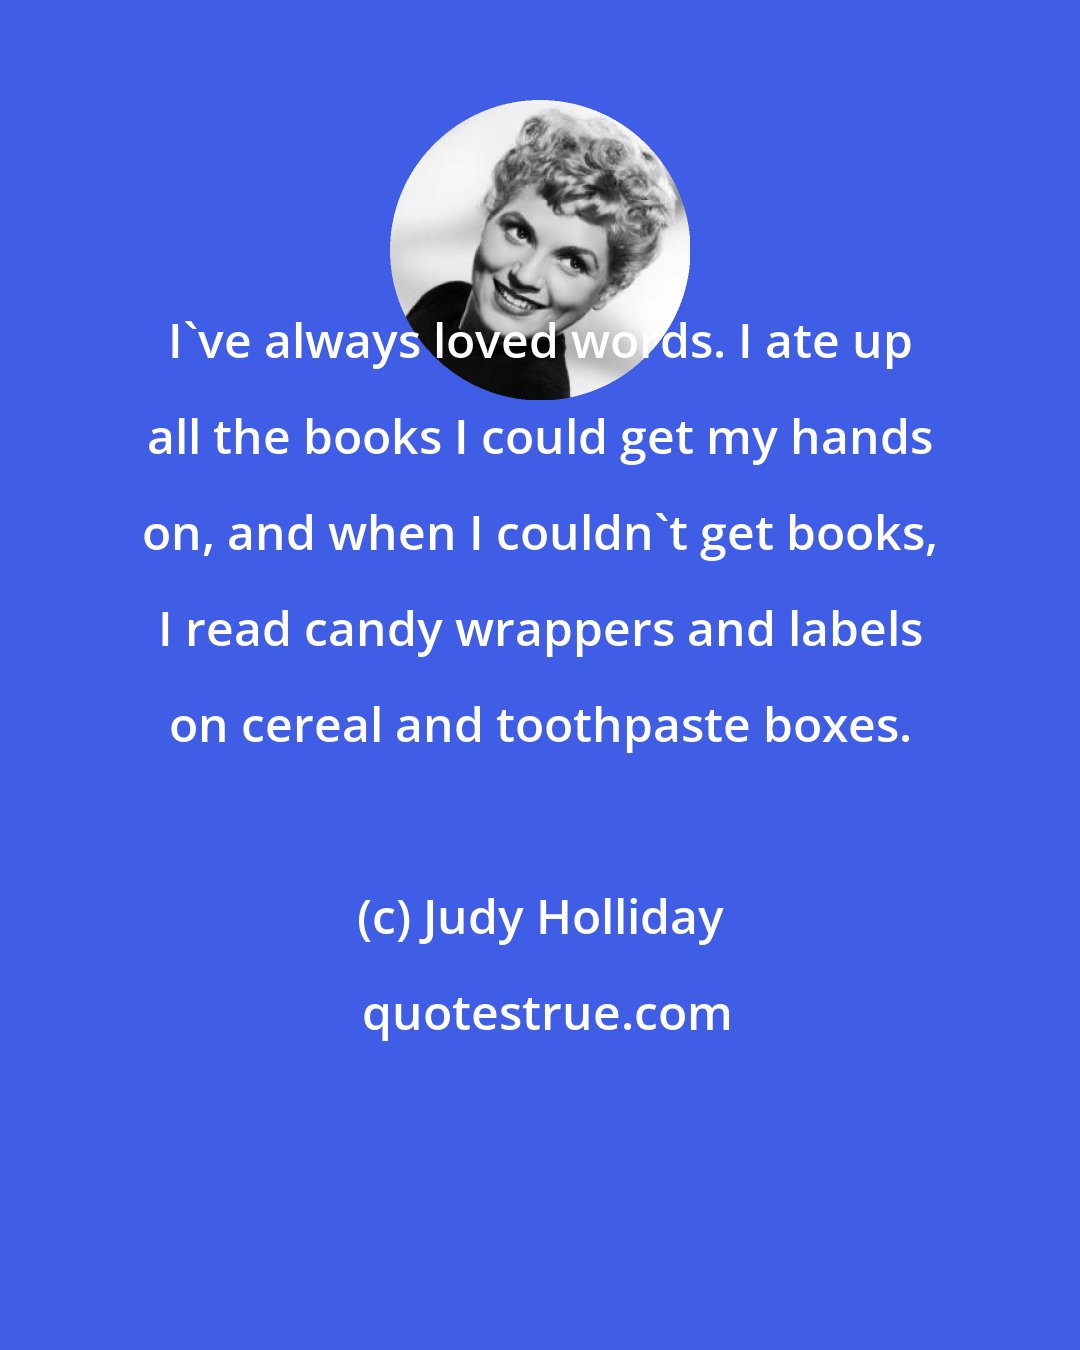 Judy Holliday: I've always loved words. I ate up all the books I could get my hands on, and when I couldn't get books, I read candy wrappers and labels on cereal and toothpaste boxes.